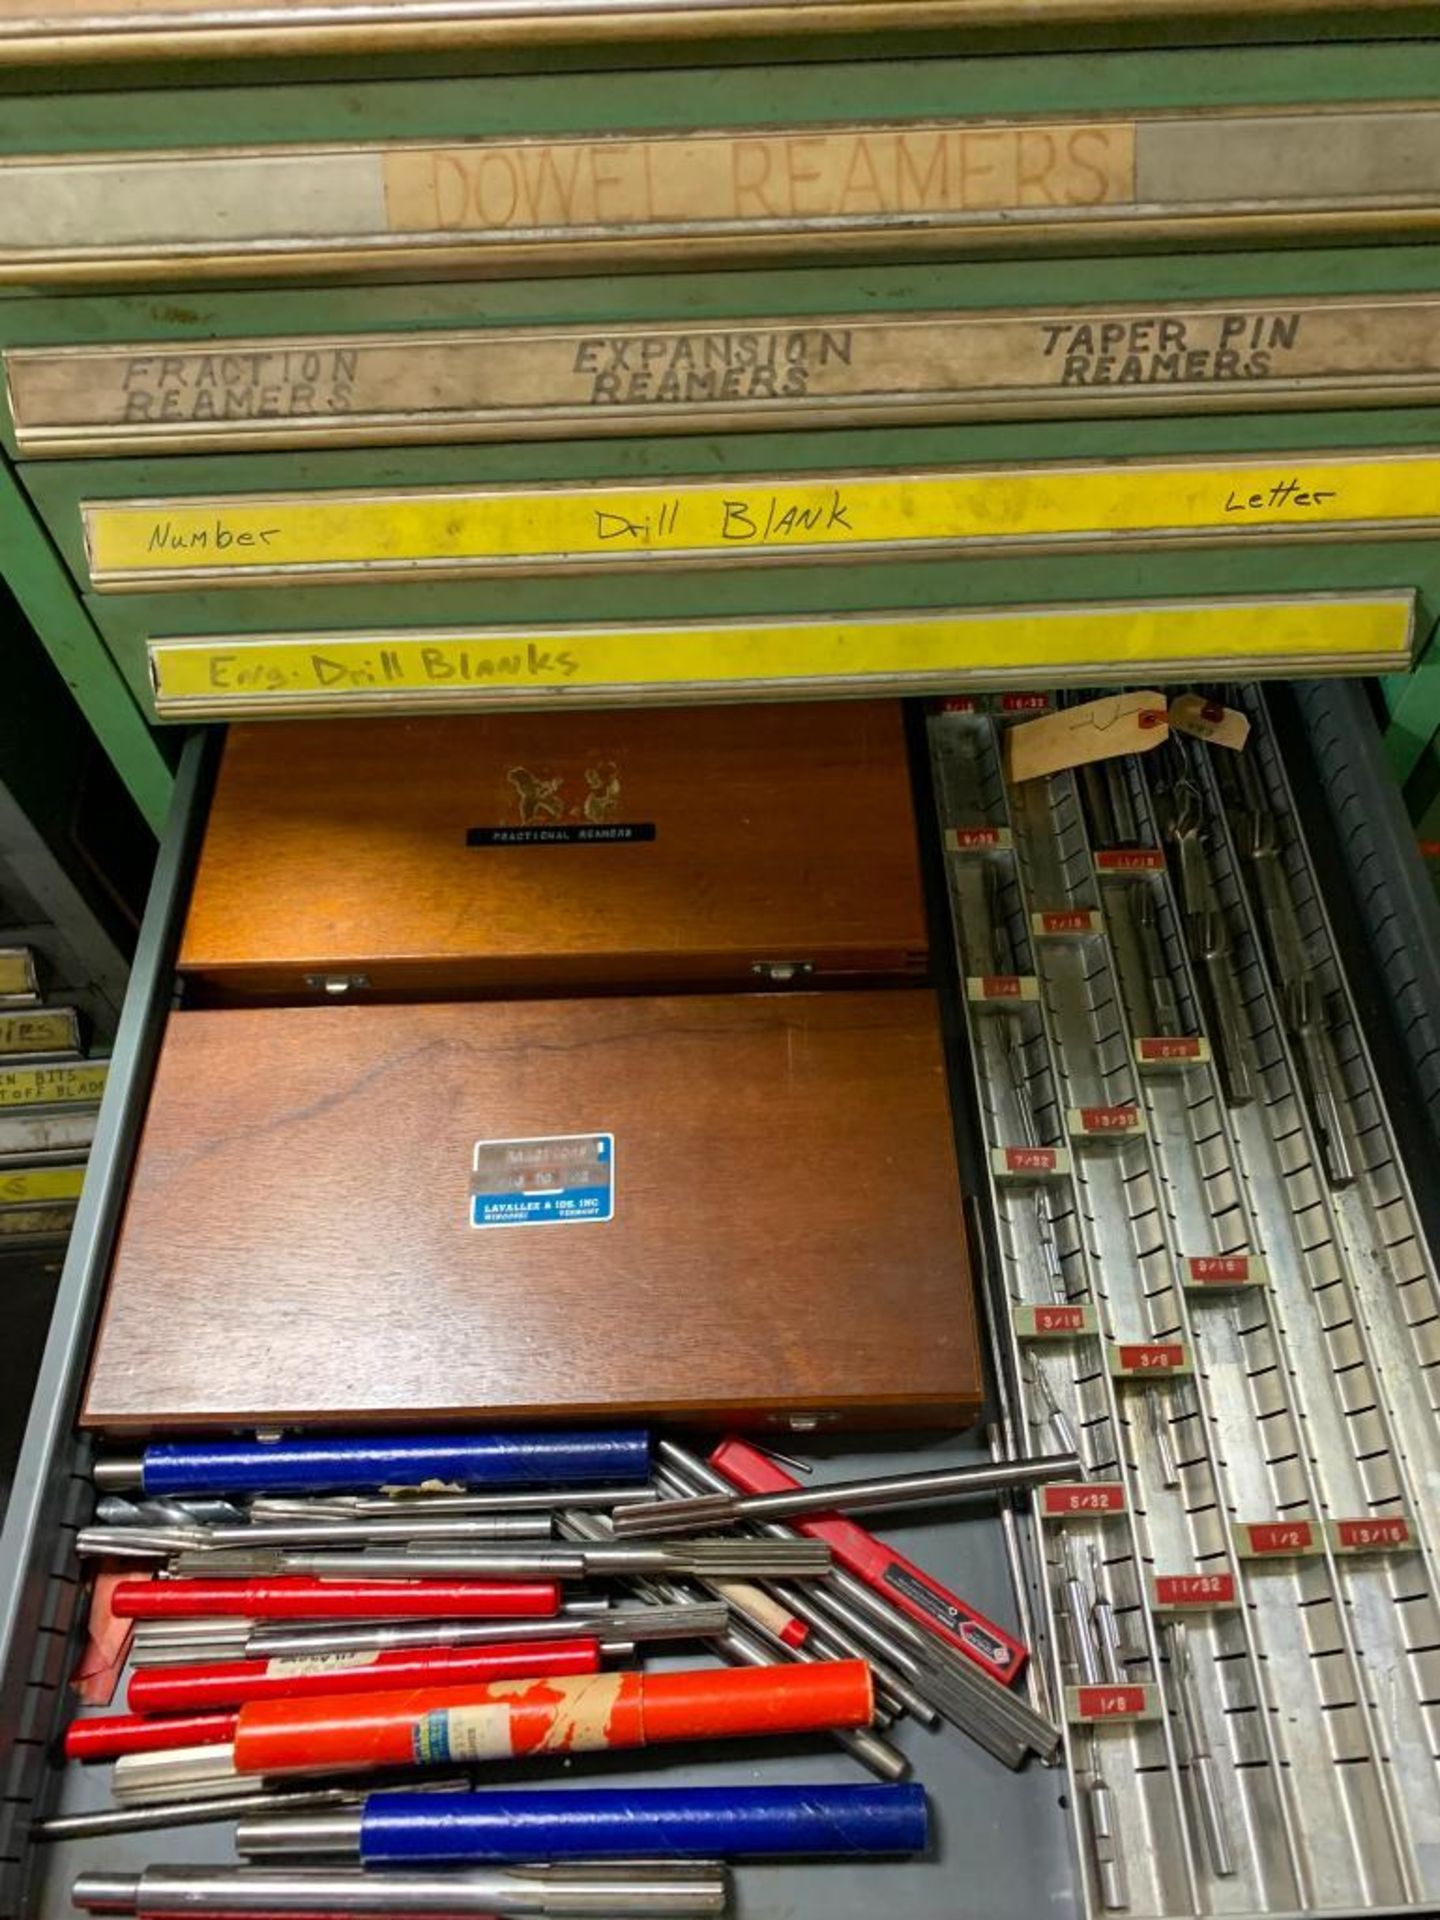 Vidmar 16-Drawer Cabinet w/ Drills, Mandrels, Feeler Stock, Reamers, Expansion Reamers, Drill Blanks - Image 13 of 24